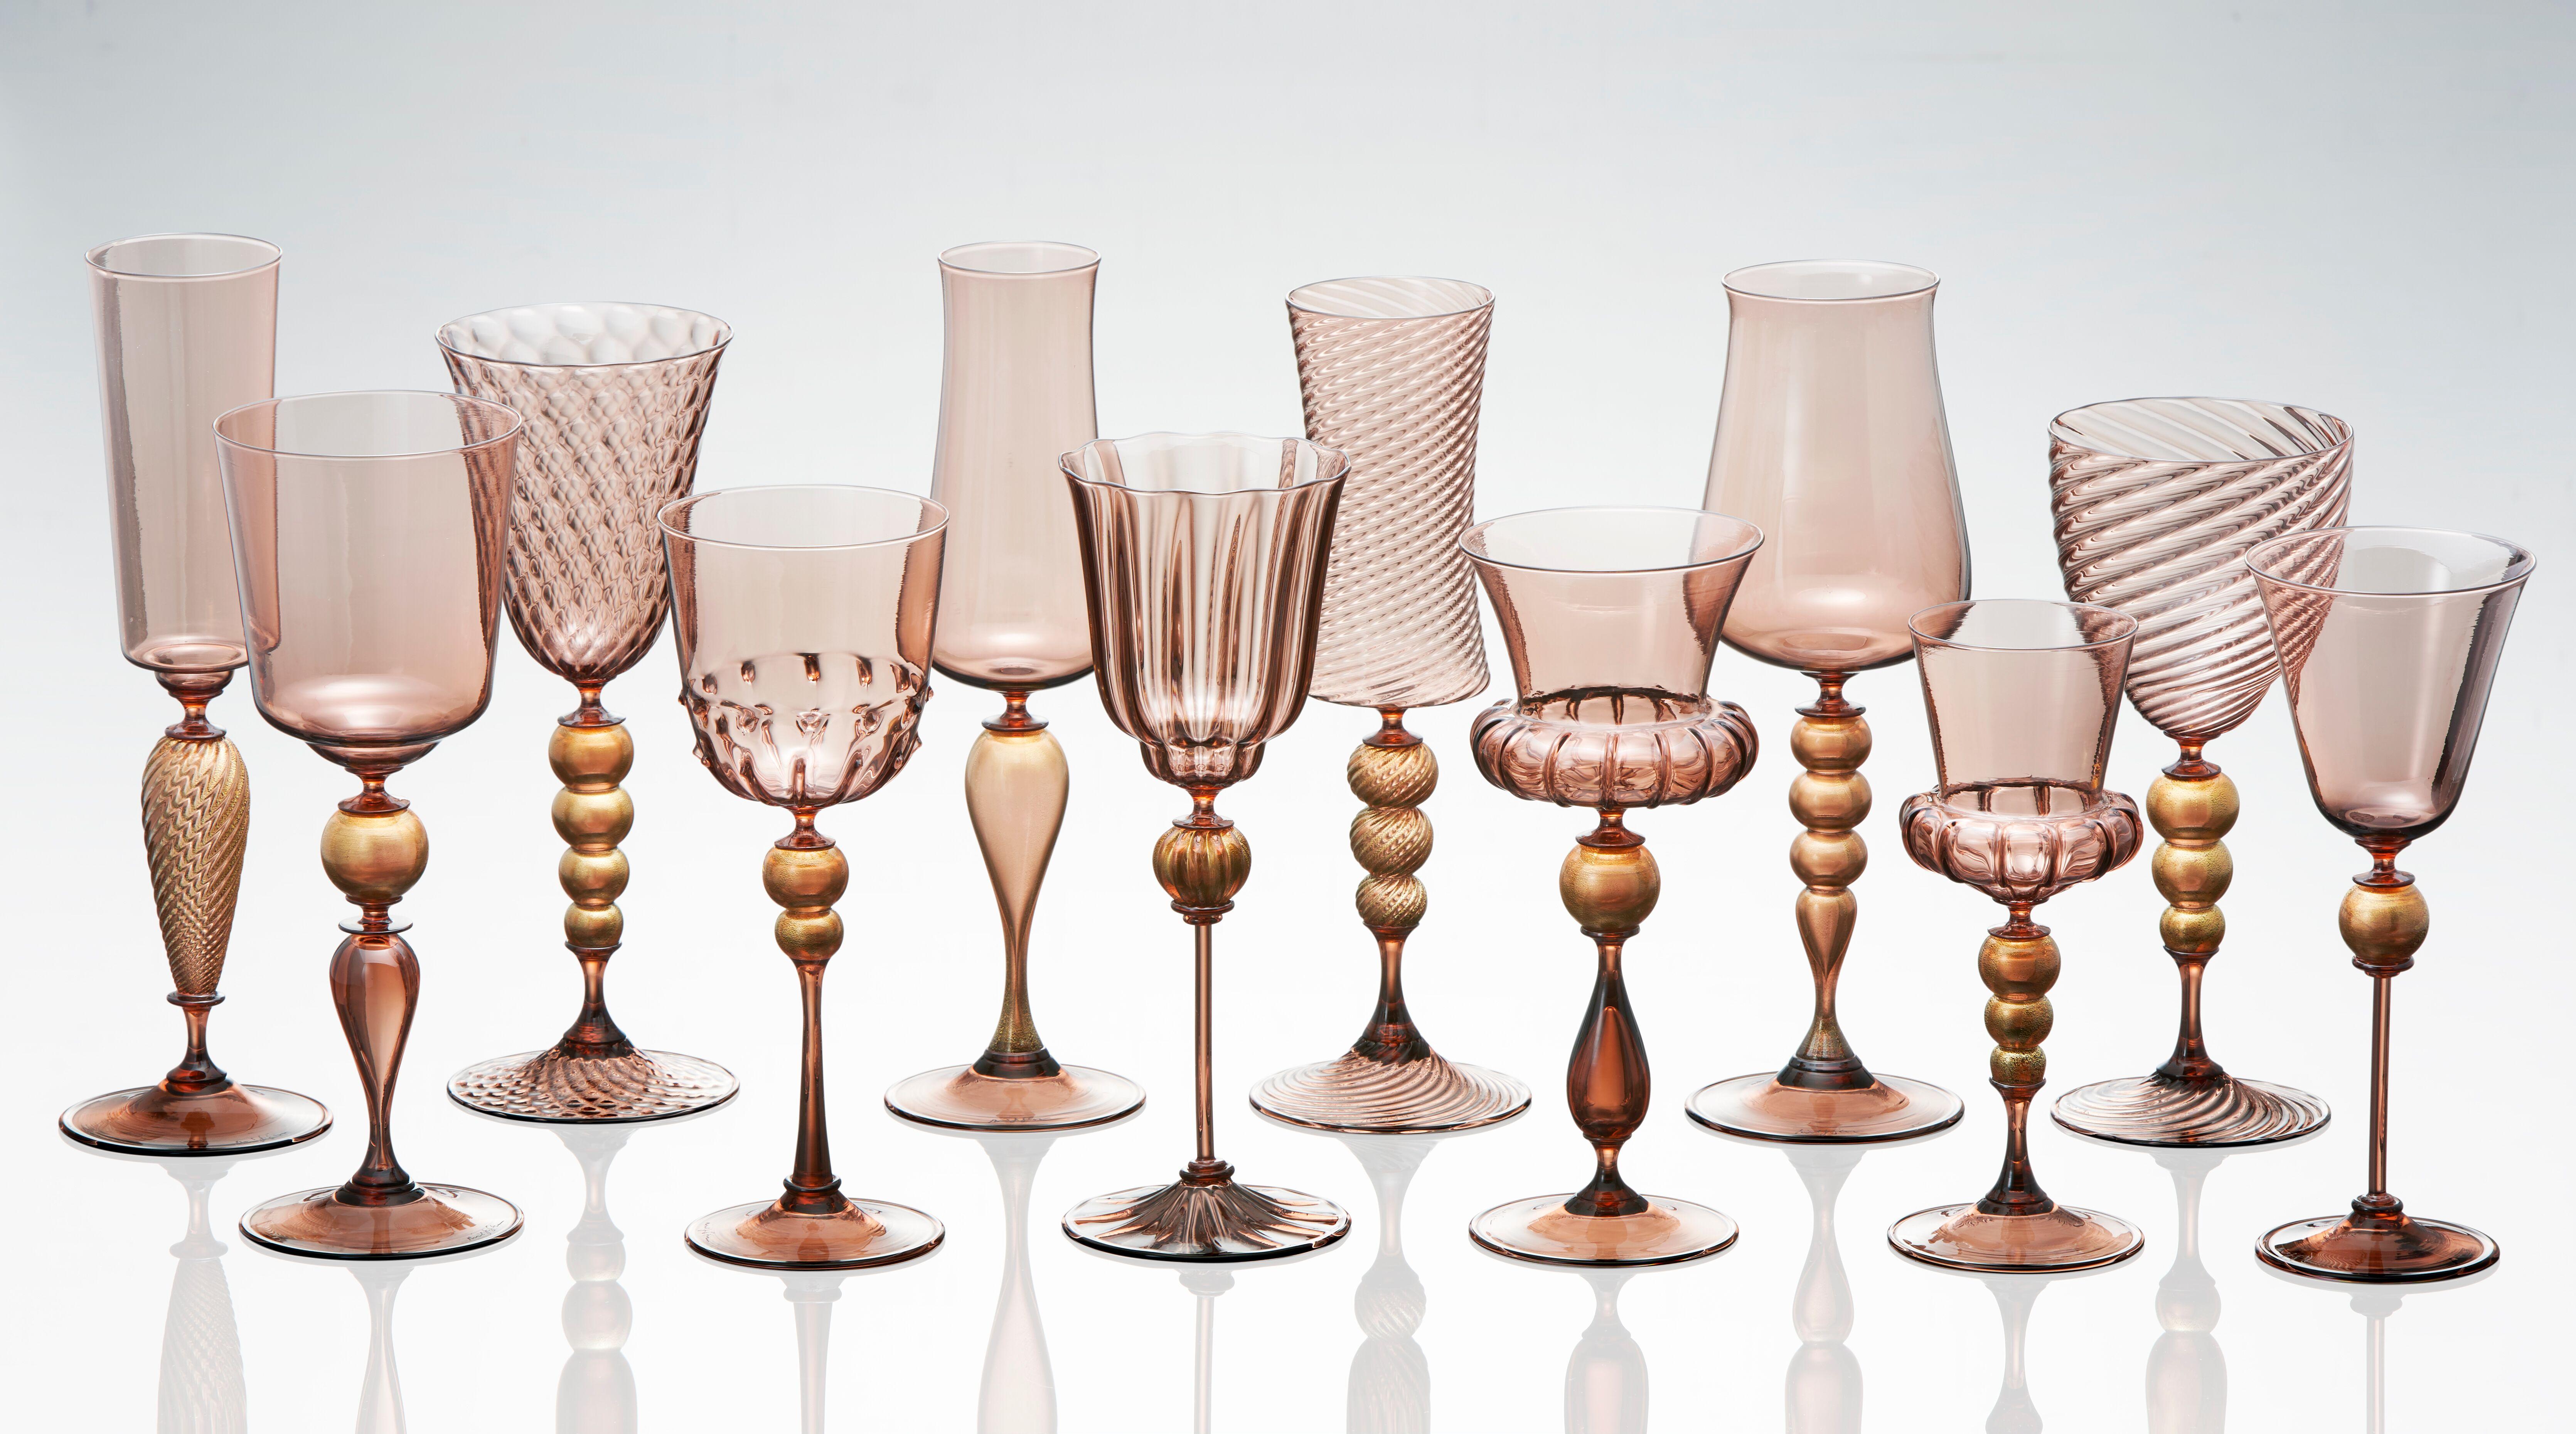 Rosewater Goblets - Art by Michael Schunke